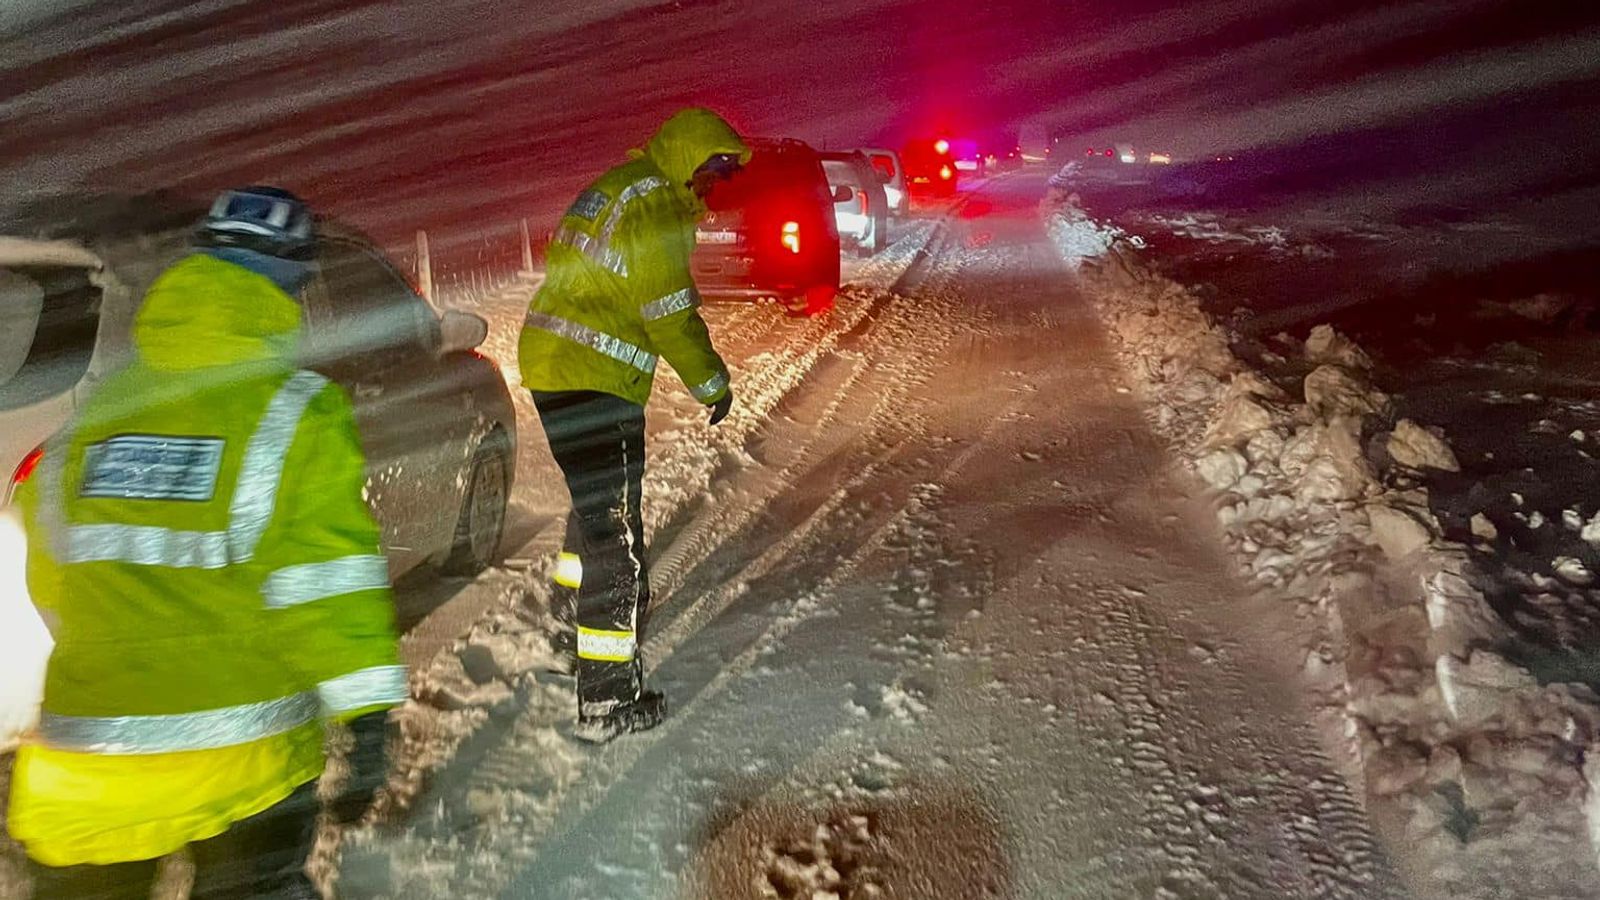 UK weather: Major incident in Shetland as thousands without power - with more snow and ice warnings for large parts of country